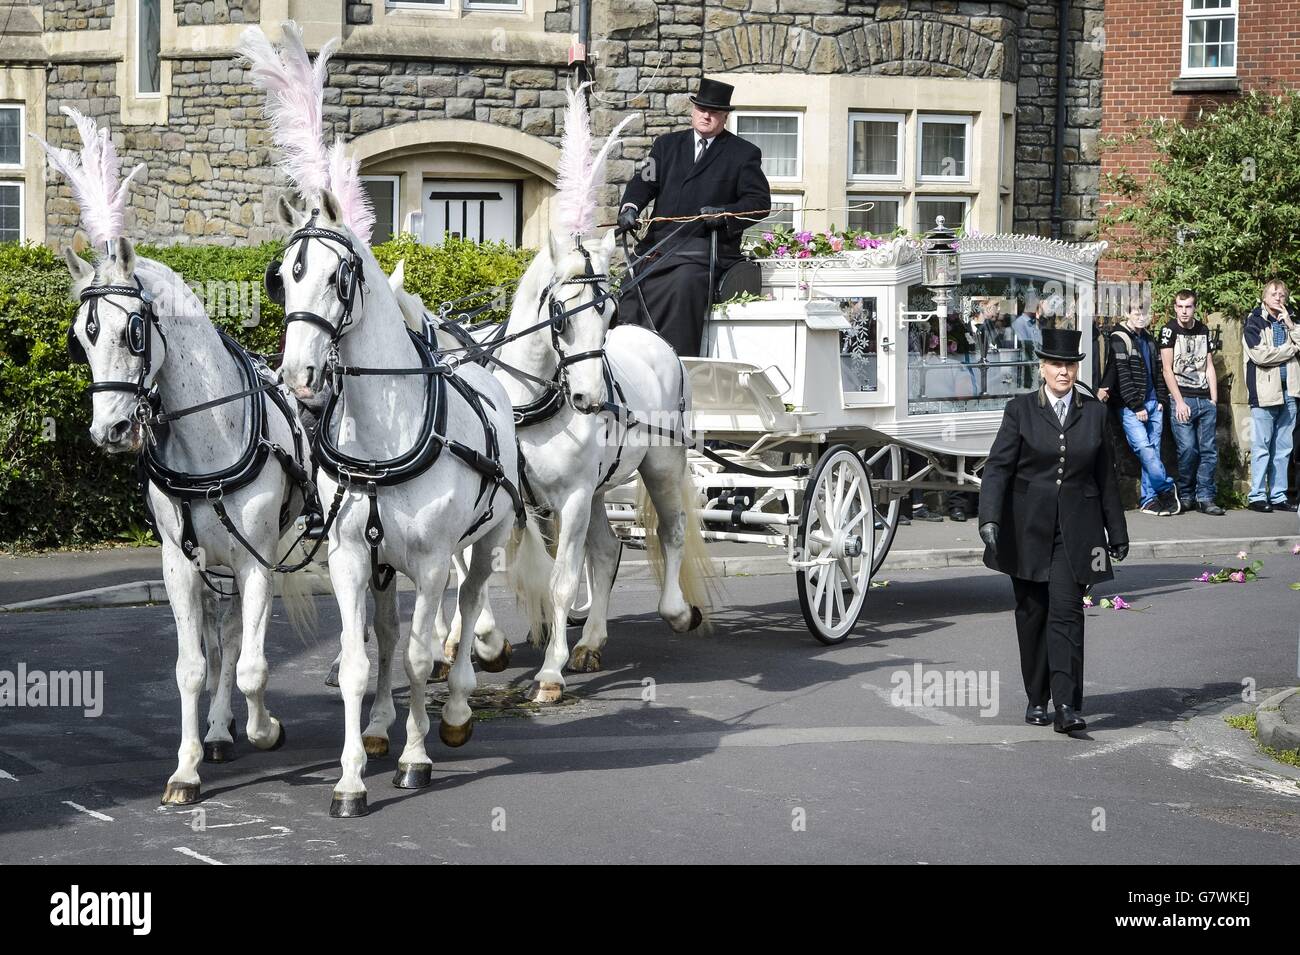 The funeral cortege arrives at St Ambrose Church in Whitehall, Bristol for the funeral of teenager Becky Watts. Stock Photo